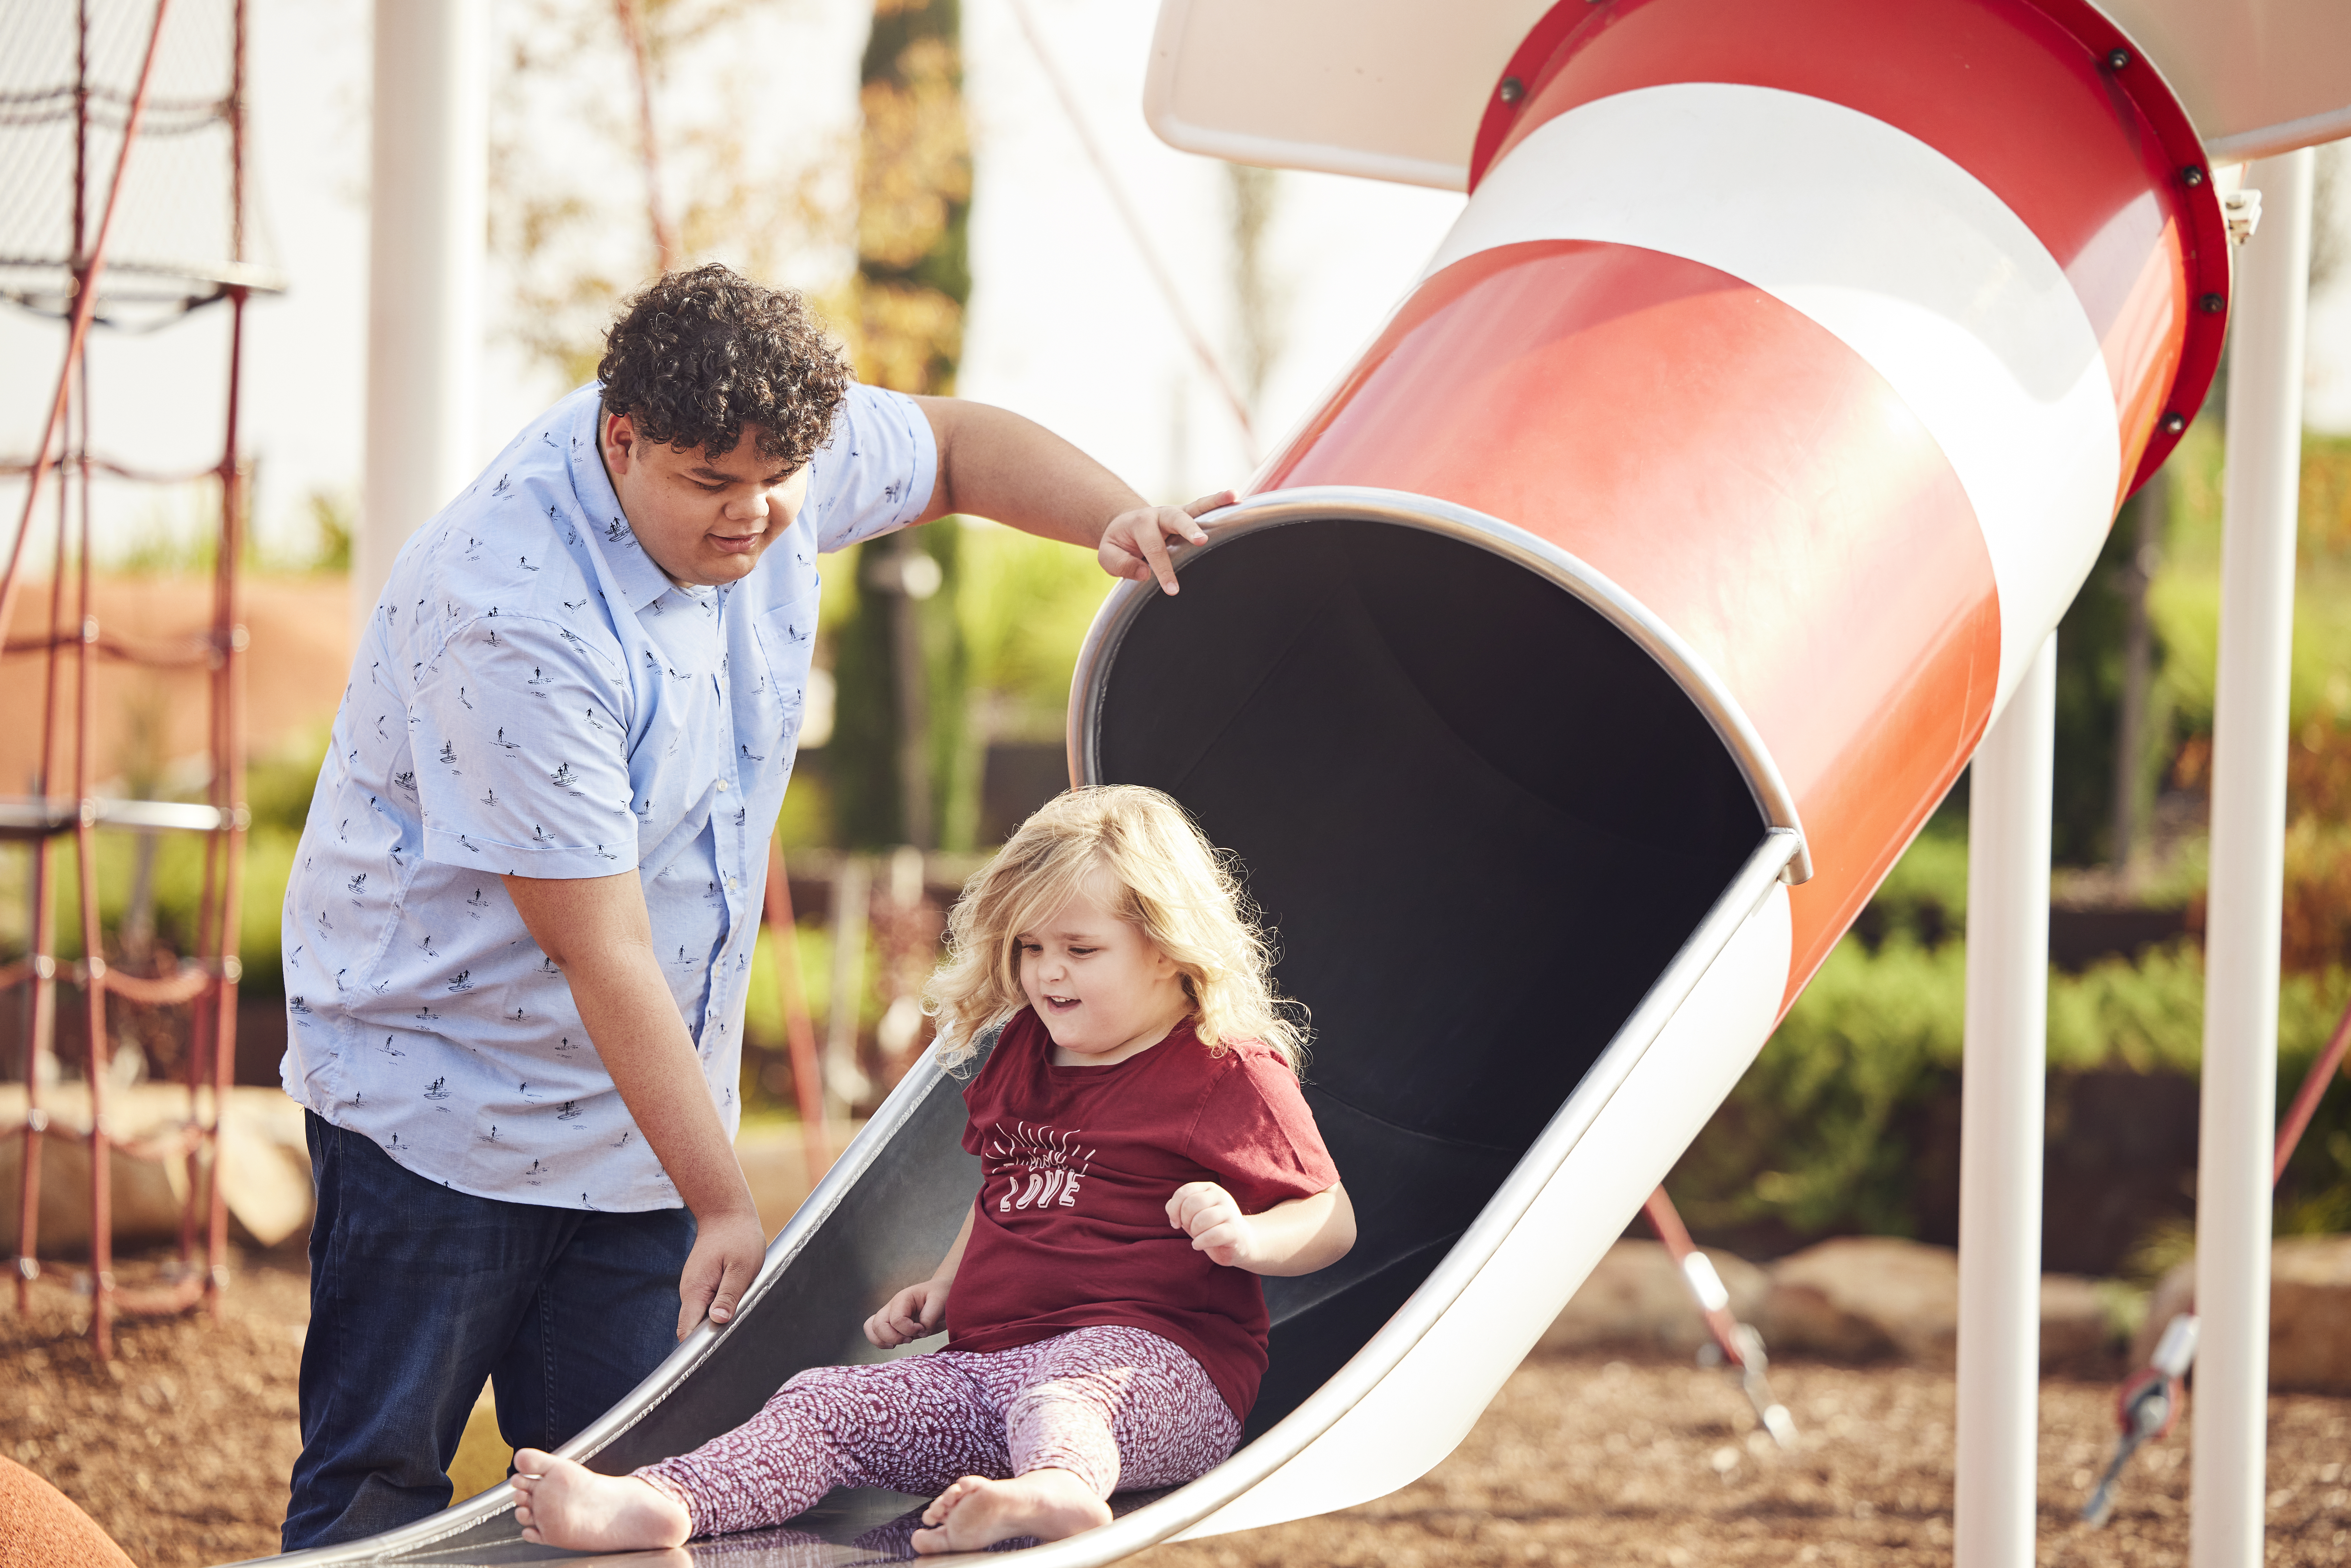 Carer assisting a child down a slide at a playground